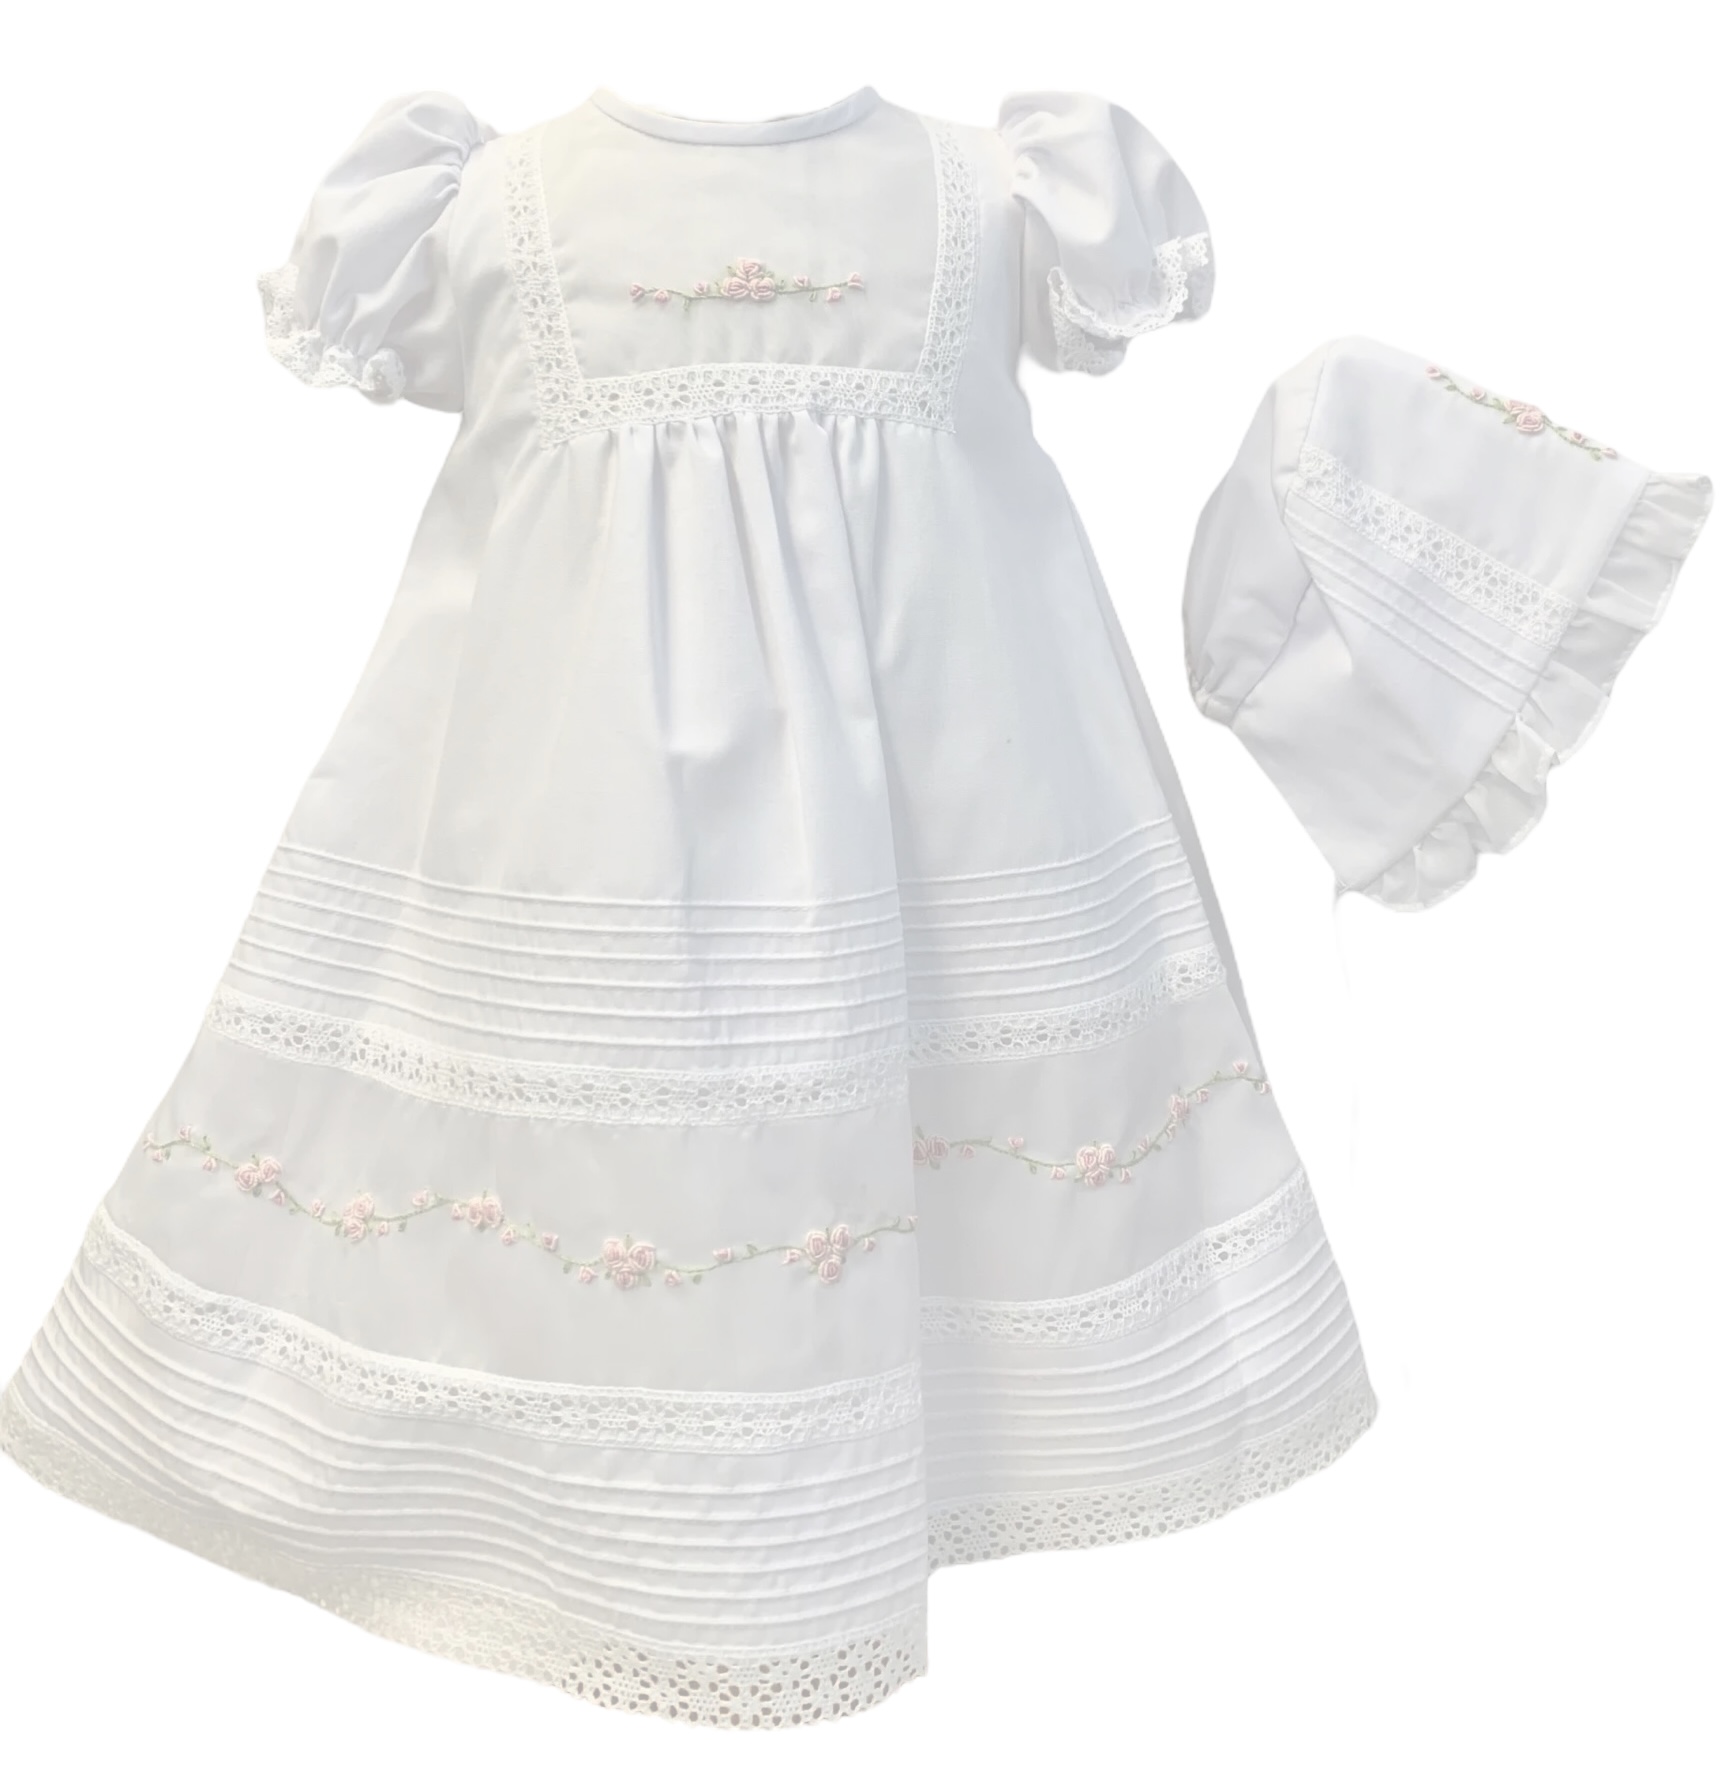 Buy White Baby Gown online | Lazada.com.ph